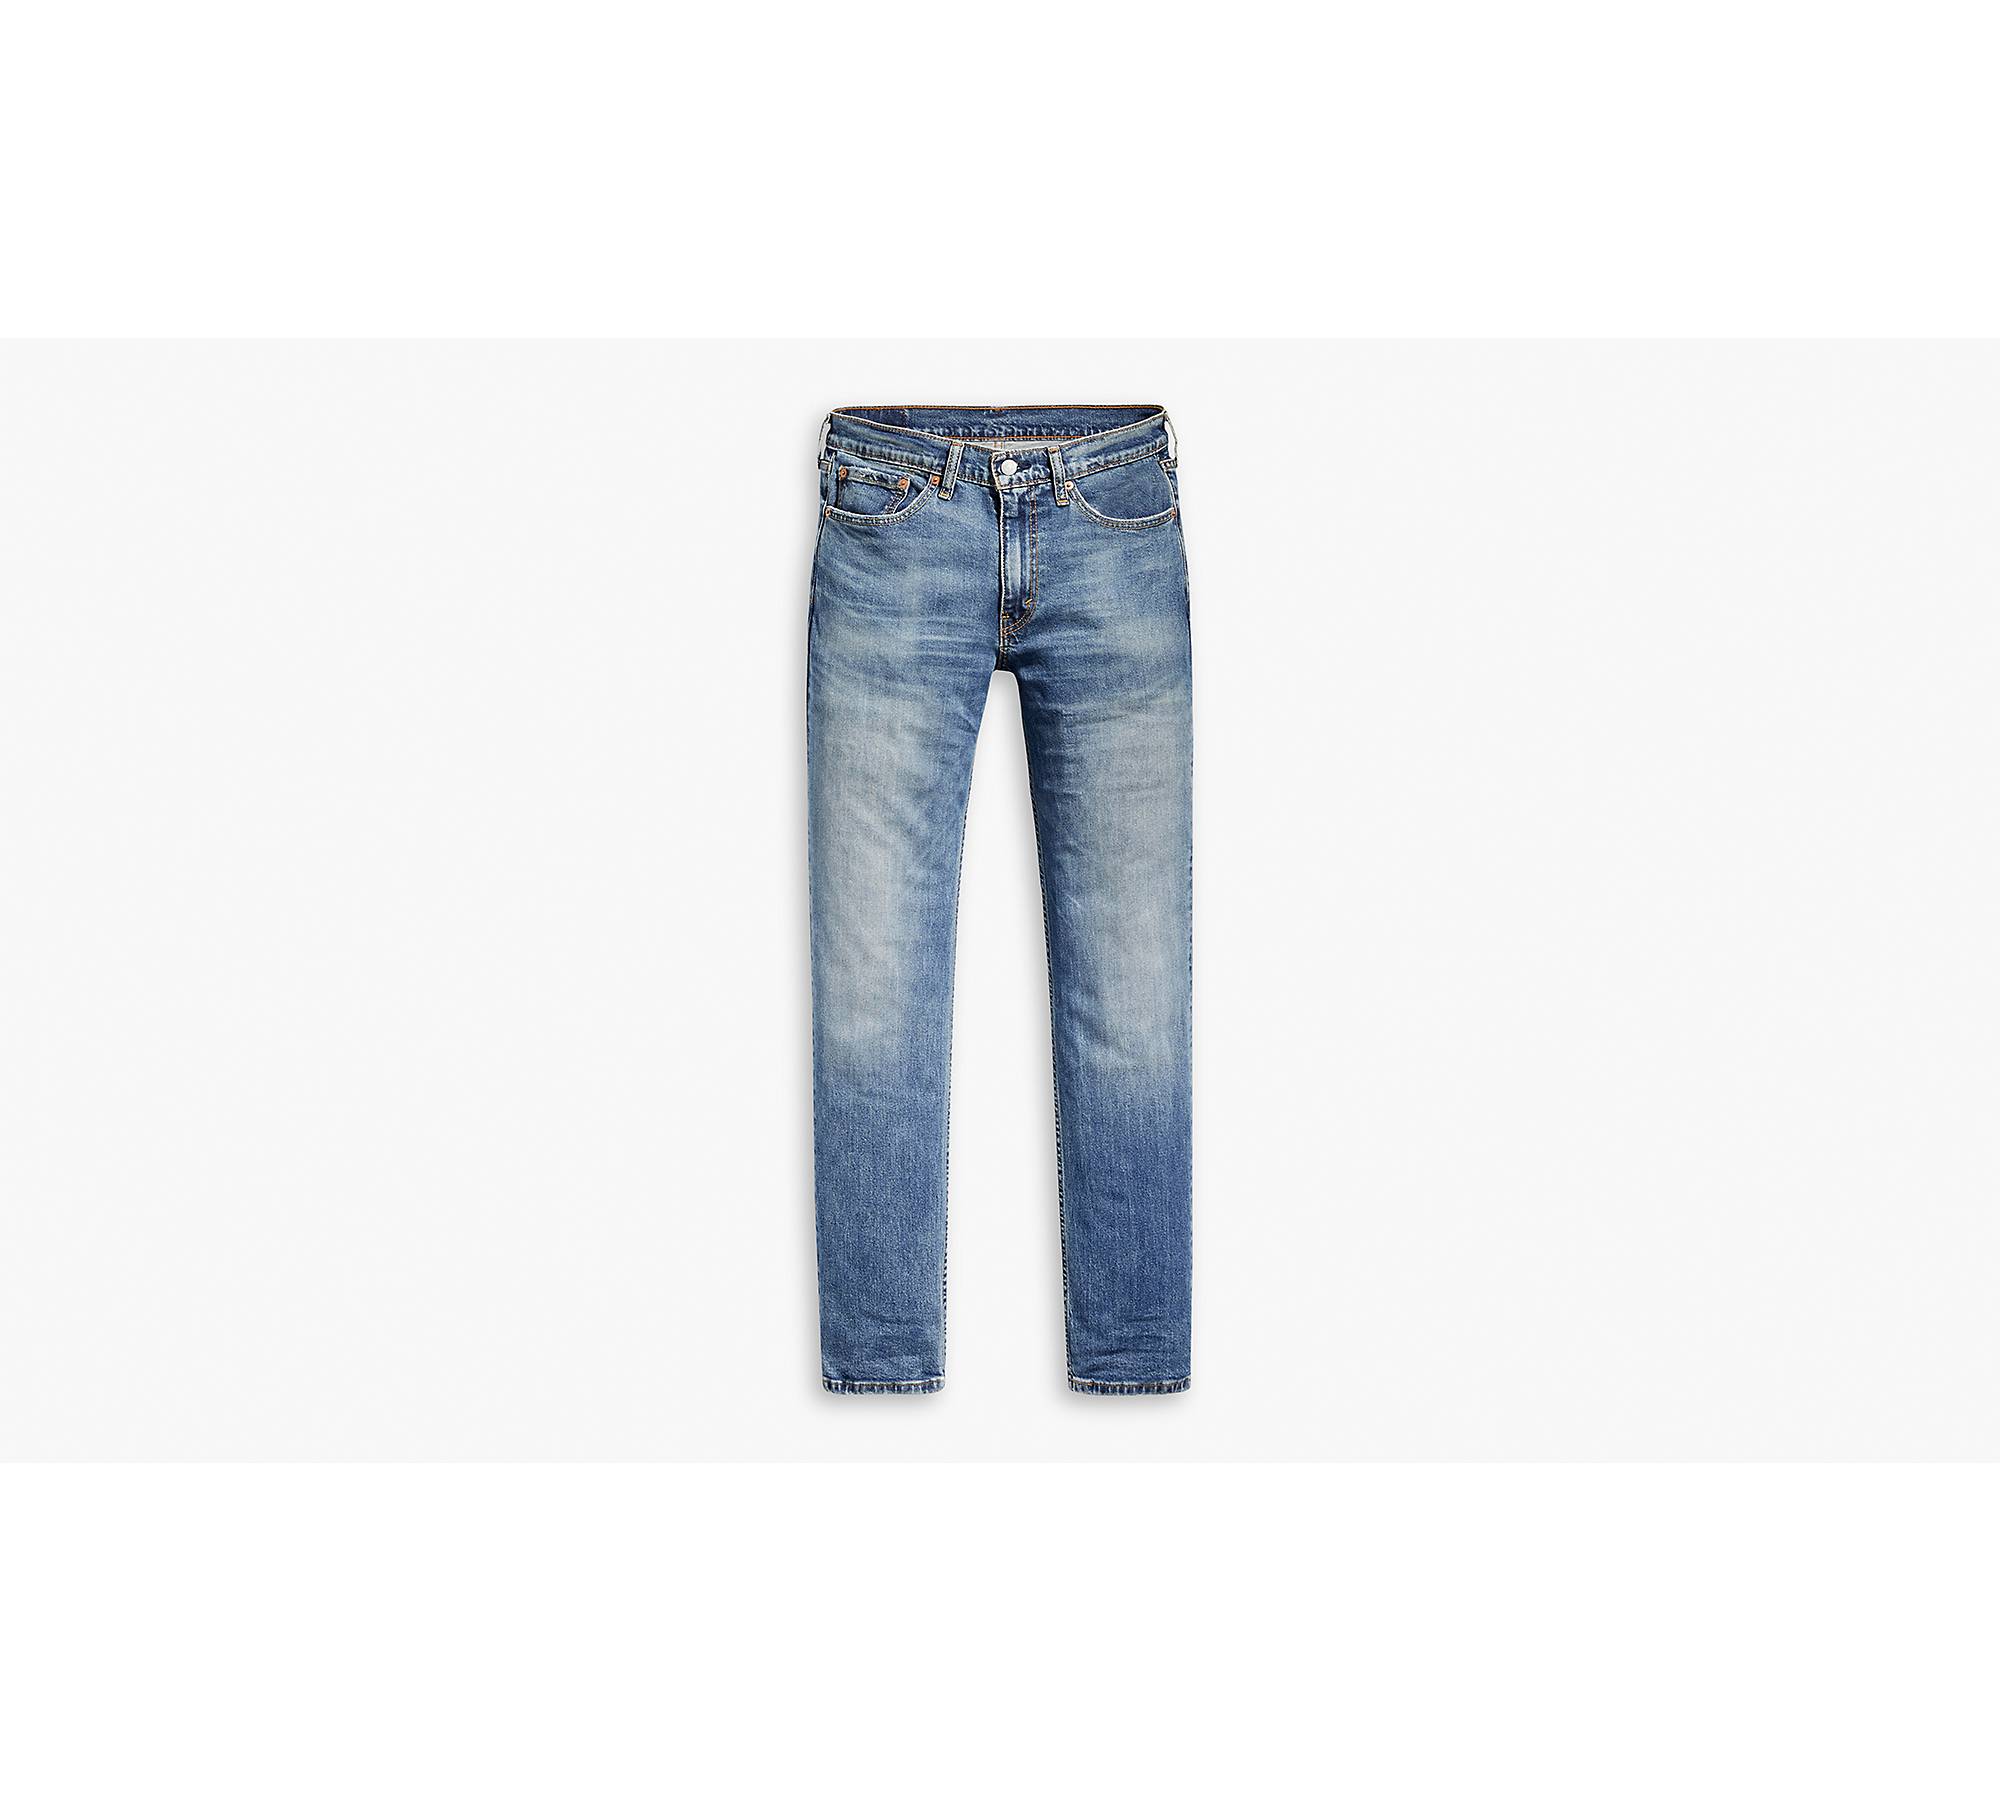 541 Athletic Jeans - Comfortable Jeans for Men